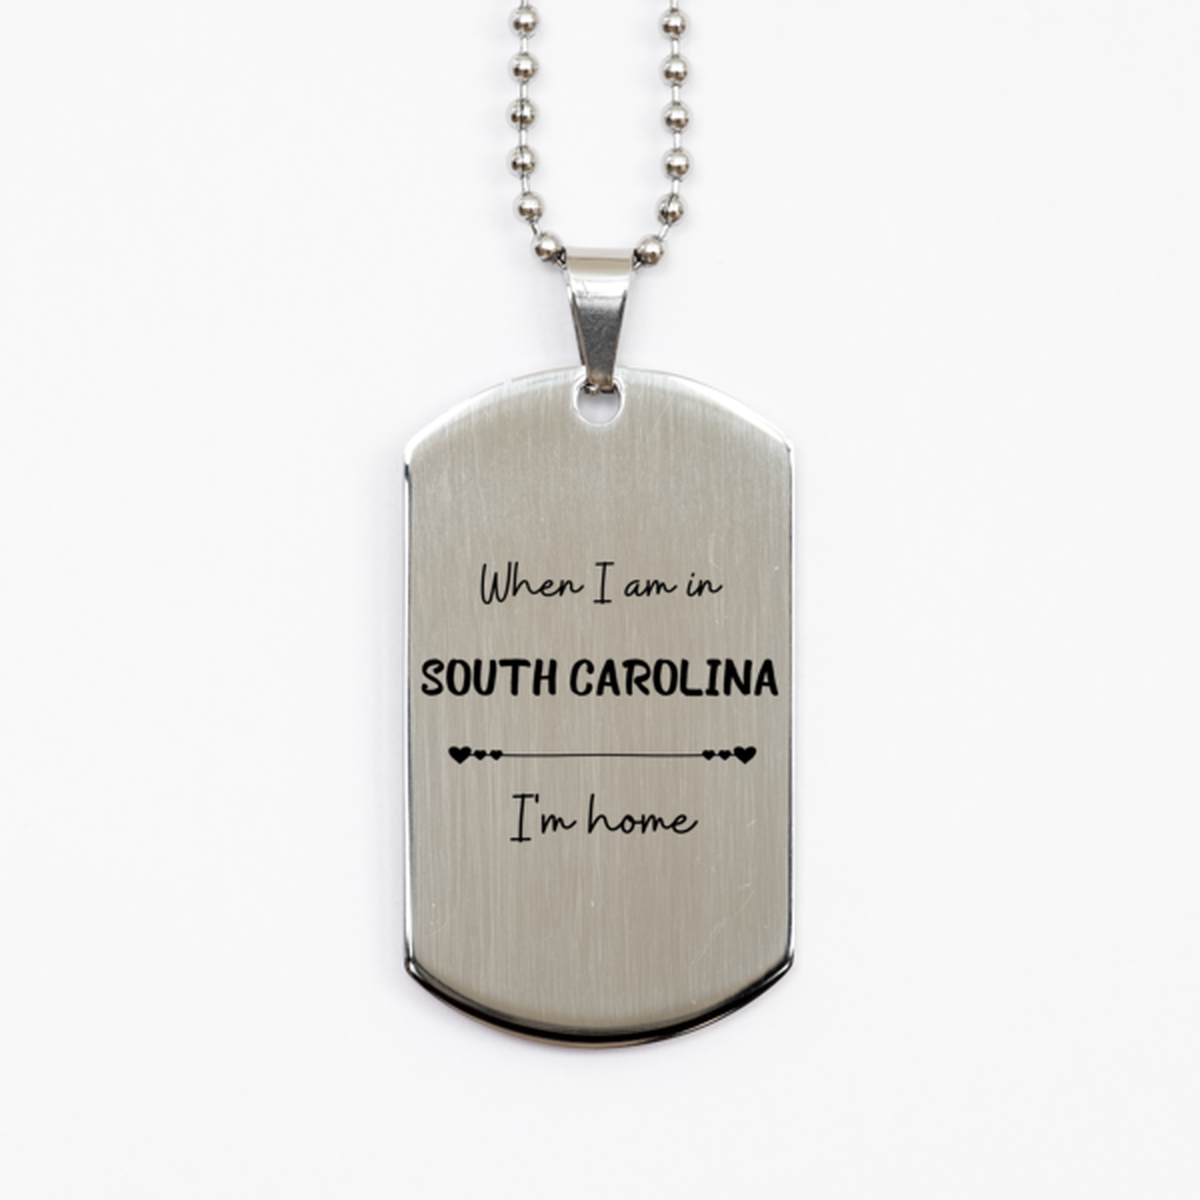 When I am in South Carolina I'm home Silver Dog Tag, Cheap Gifts For South Carolina, State South Carolina Birthday Gifts for Friends Coworker